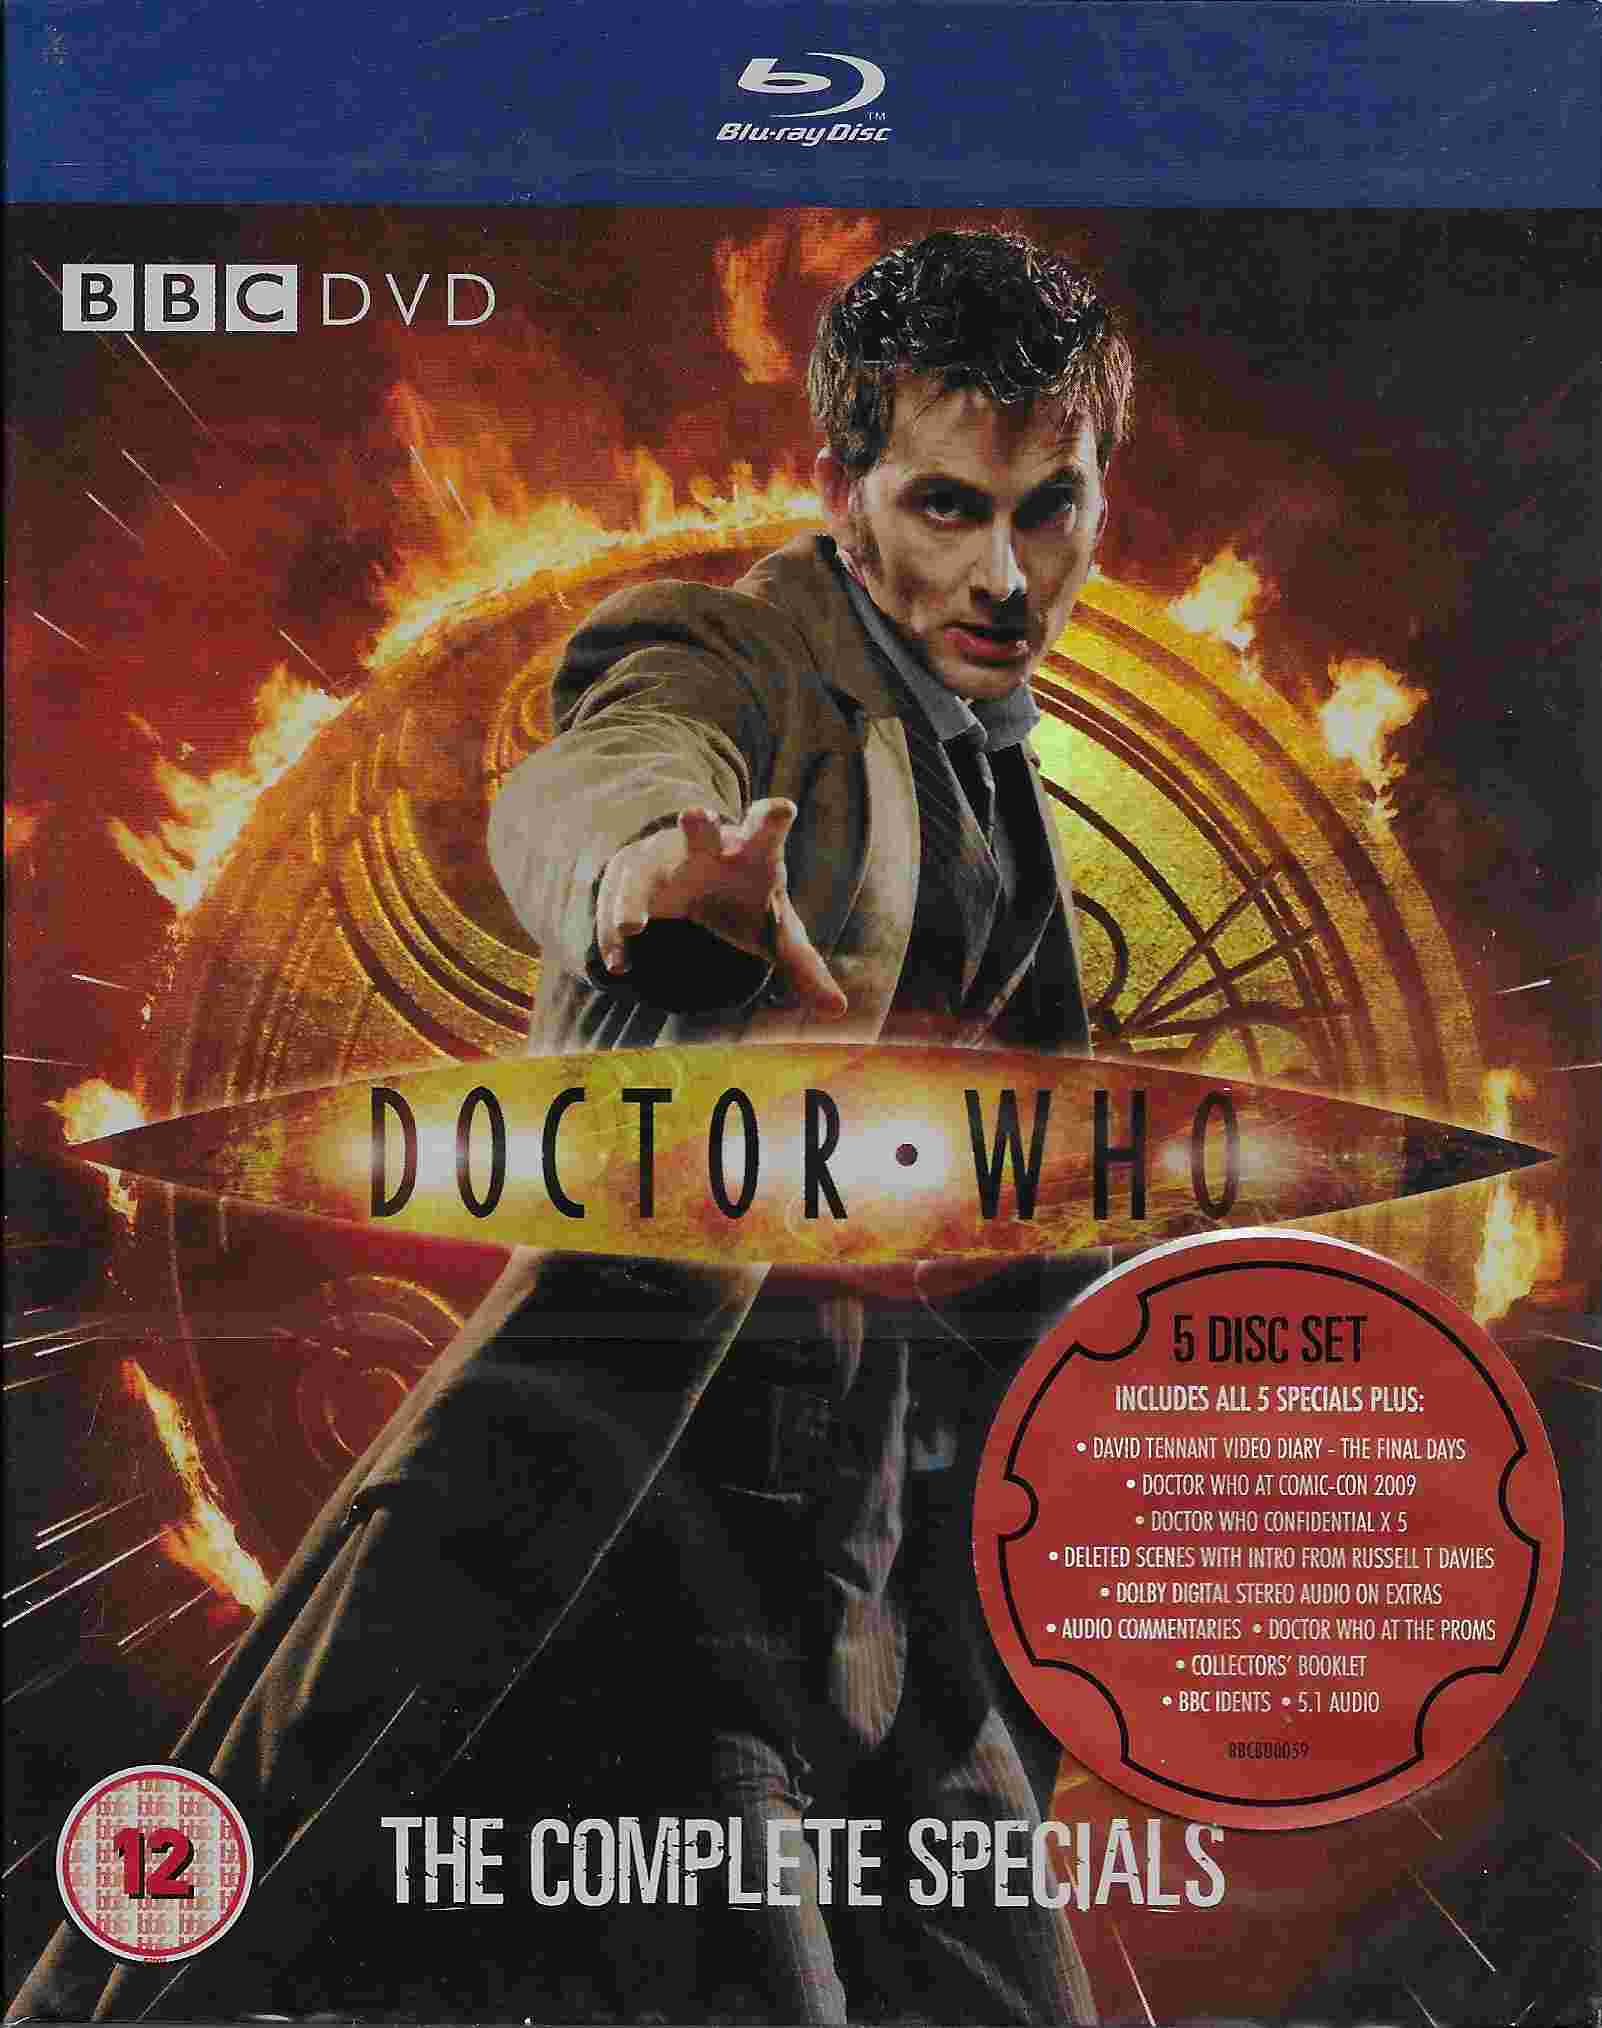 Picture of BBCBD 0059 Doctor Who - The complete specials by artist Russell T Davies / Gareth Roberts / Phil Ford from the BBC blu-rays - Records and Tapes library